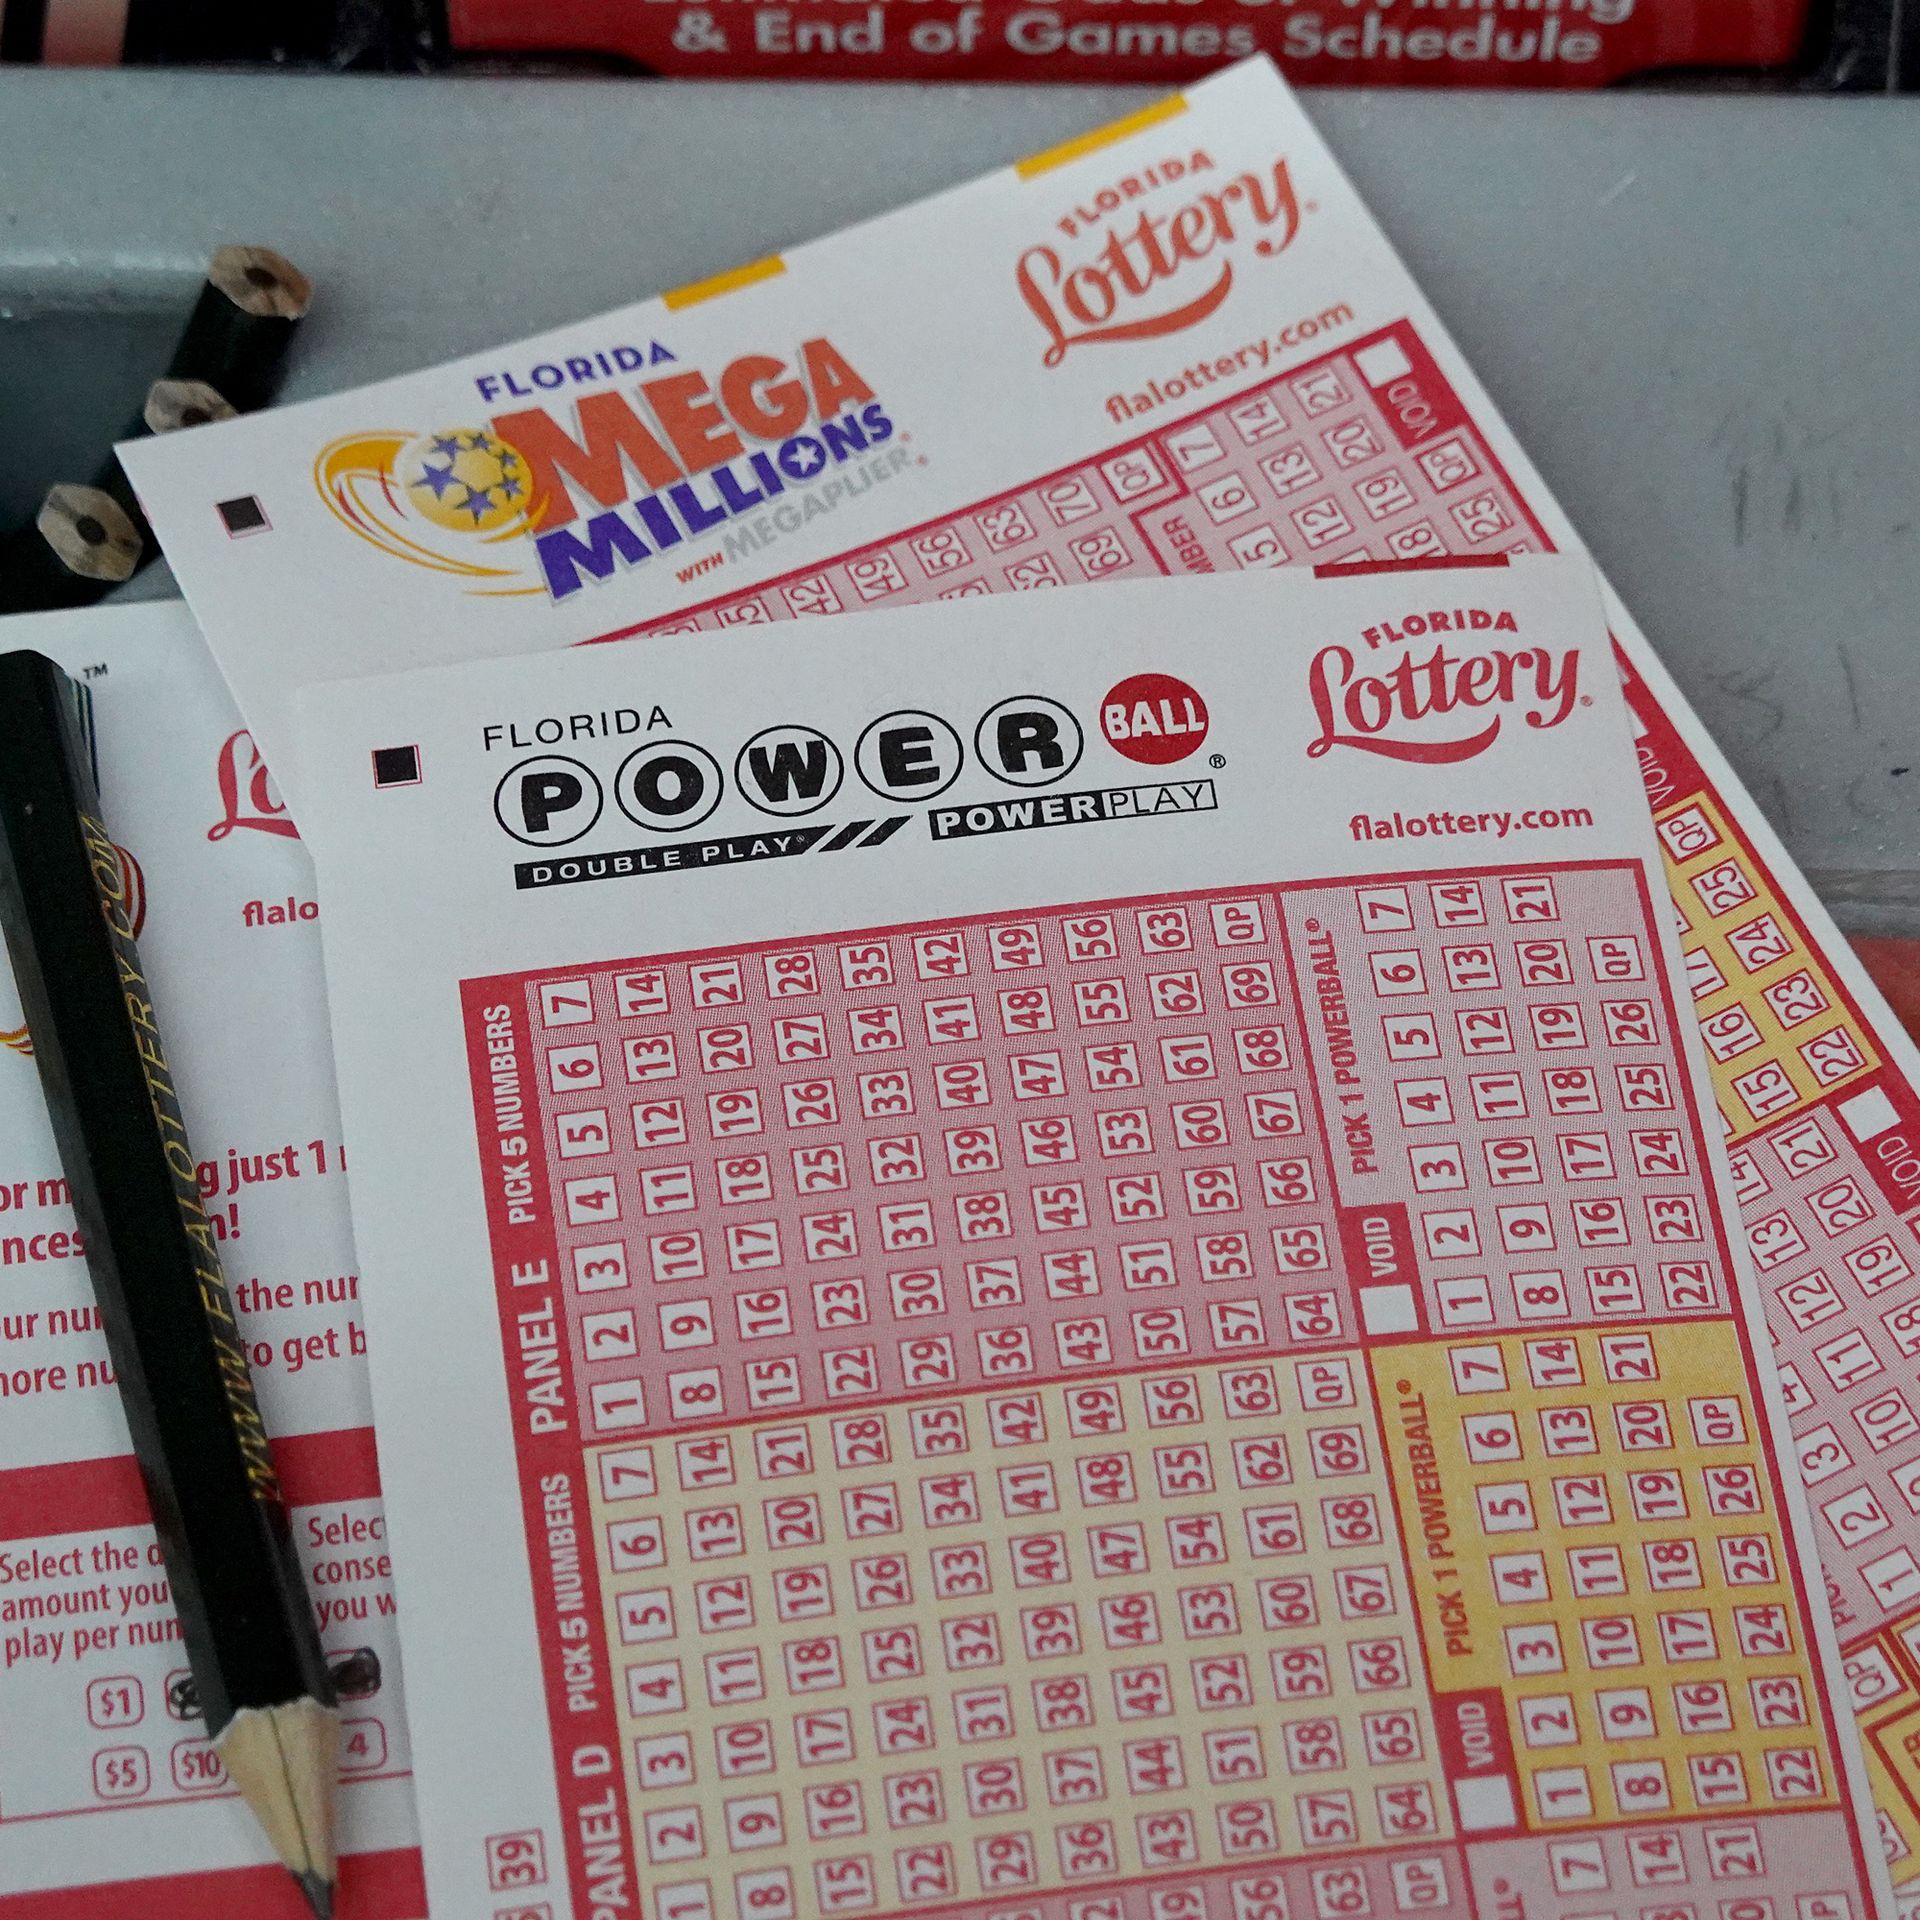 Powerball numbers: Jackpot up to 1.4 billion after no winner